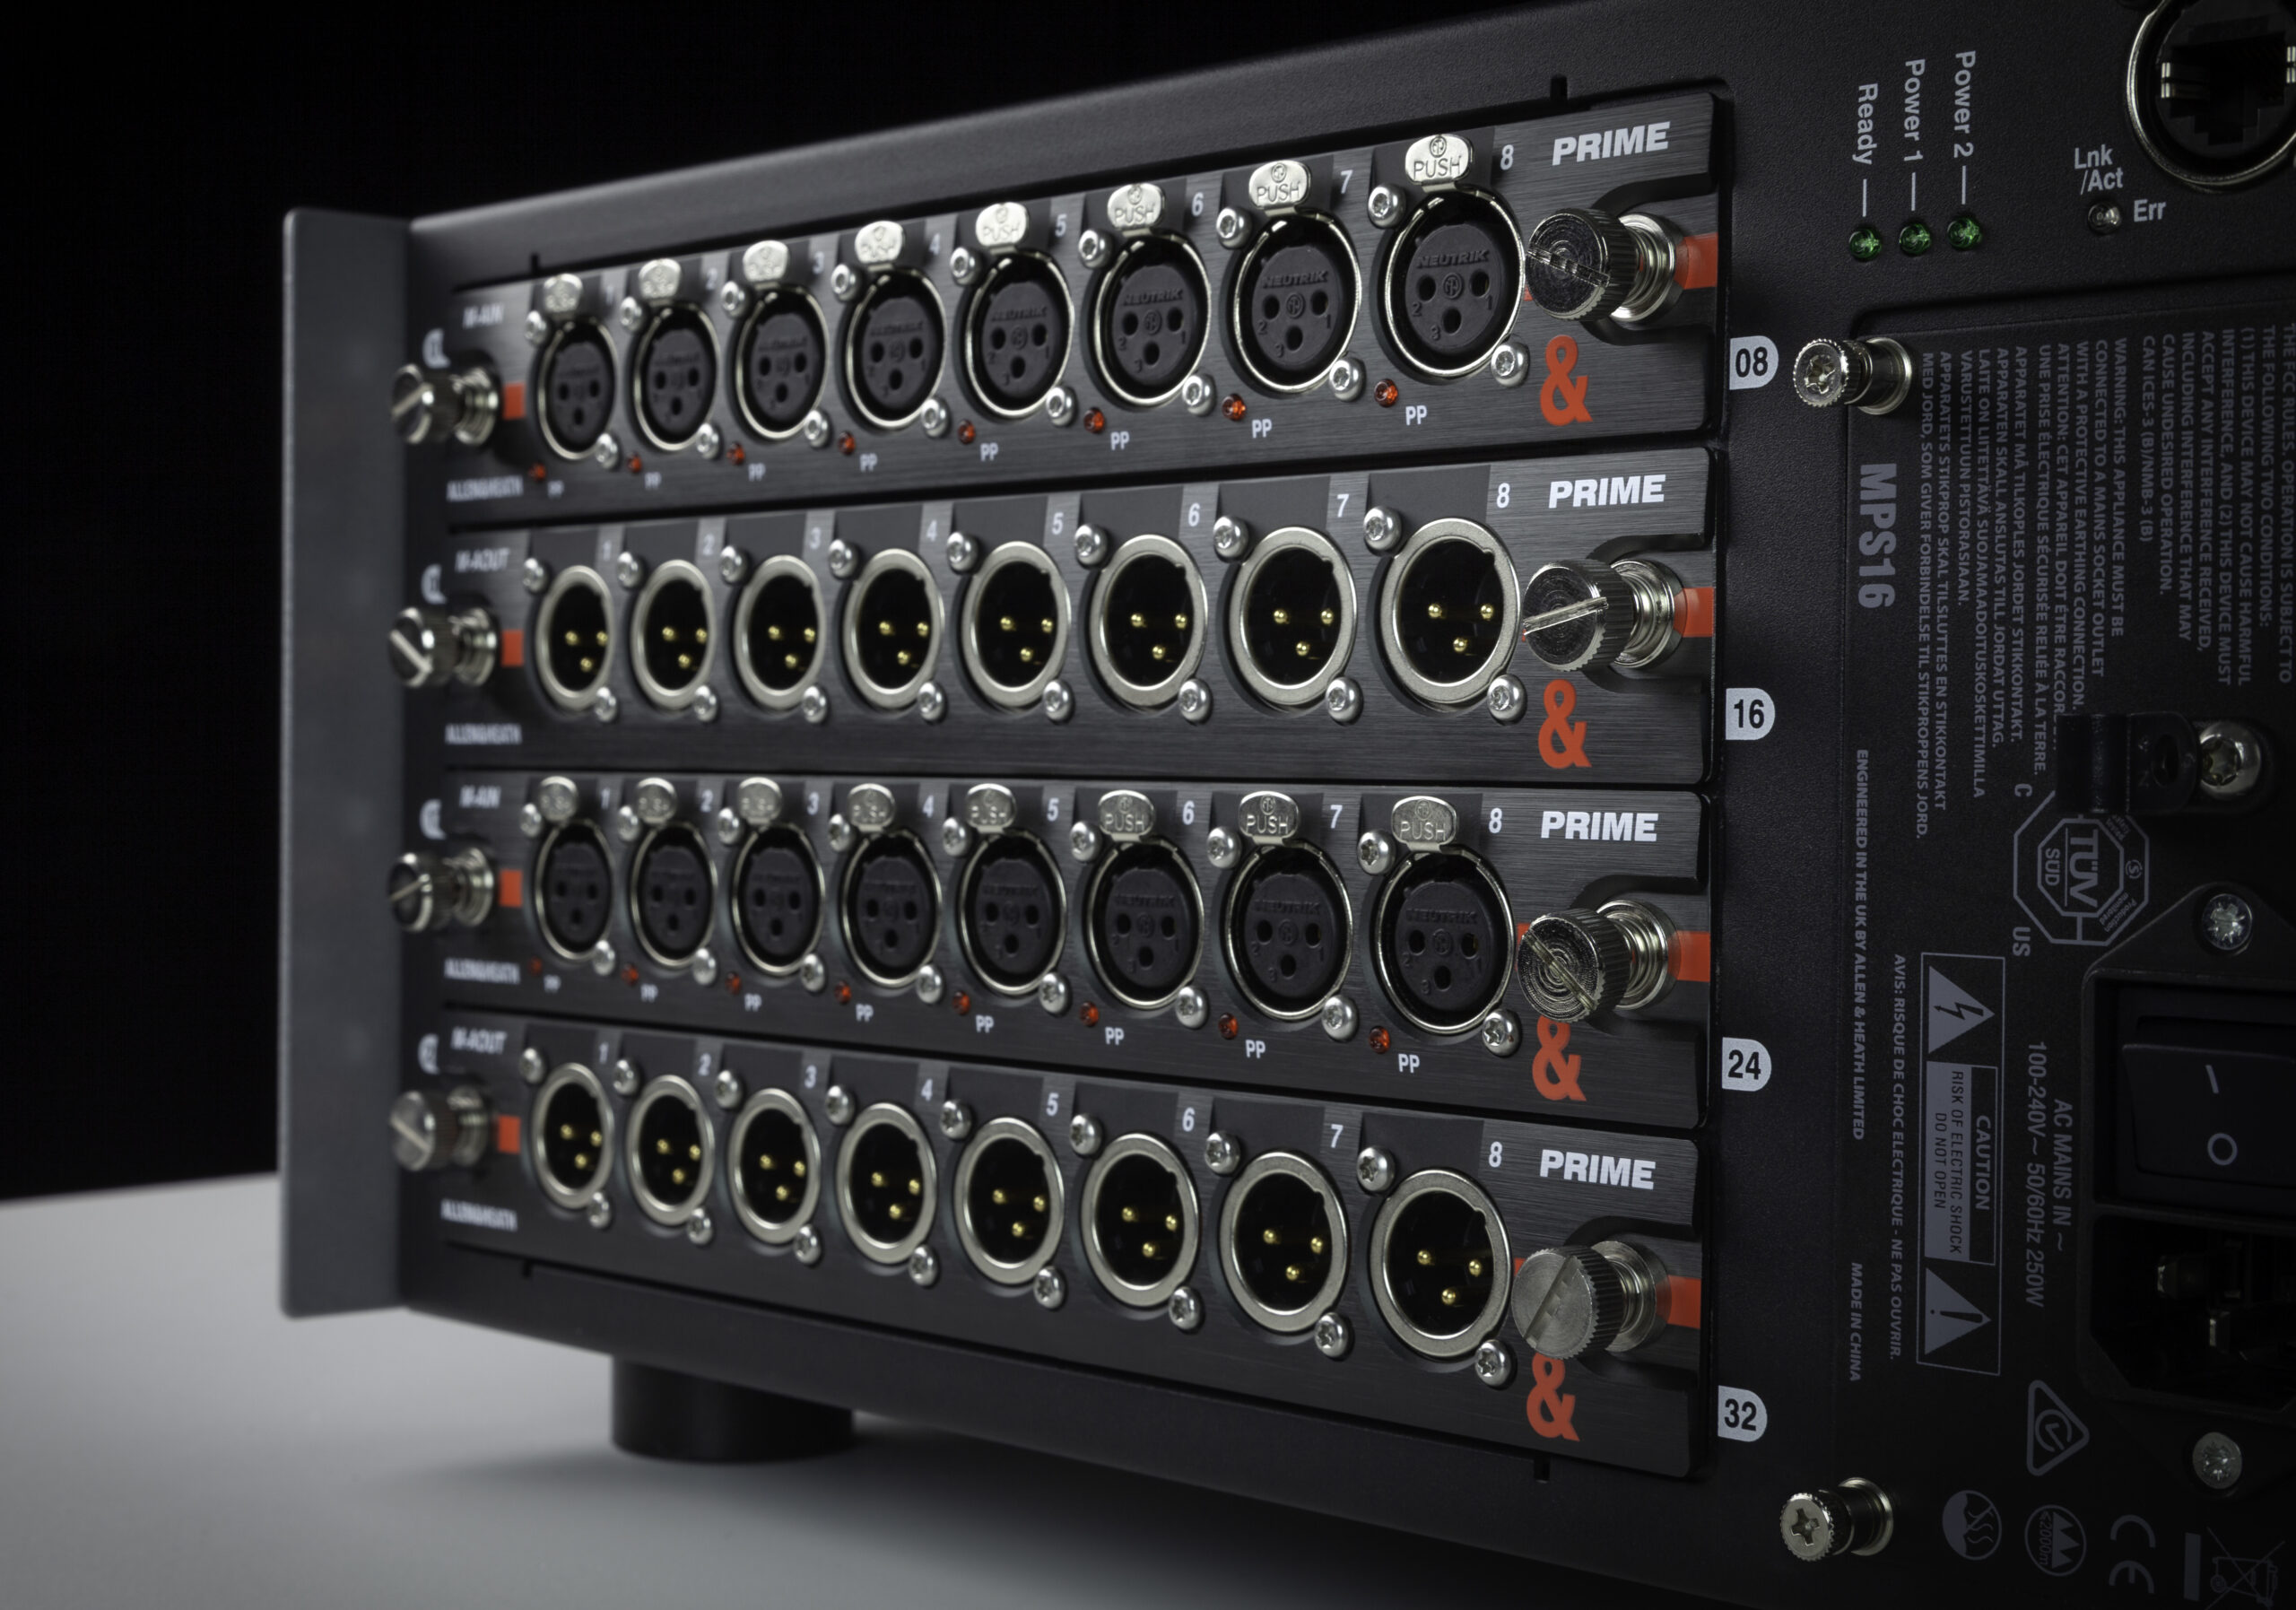 The DX32 modular stageboxes are equipped with several PRIME input and output modules